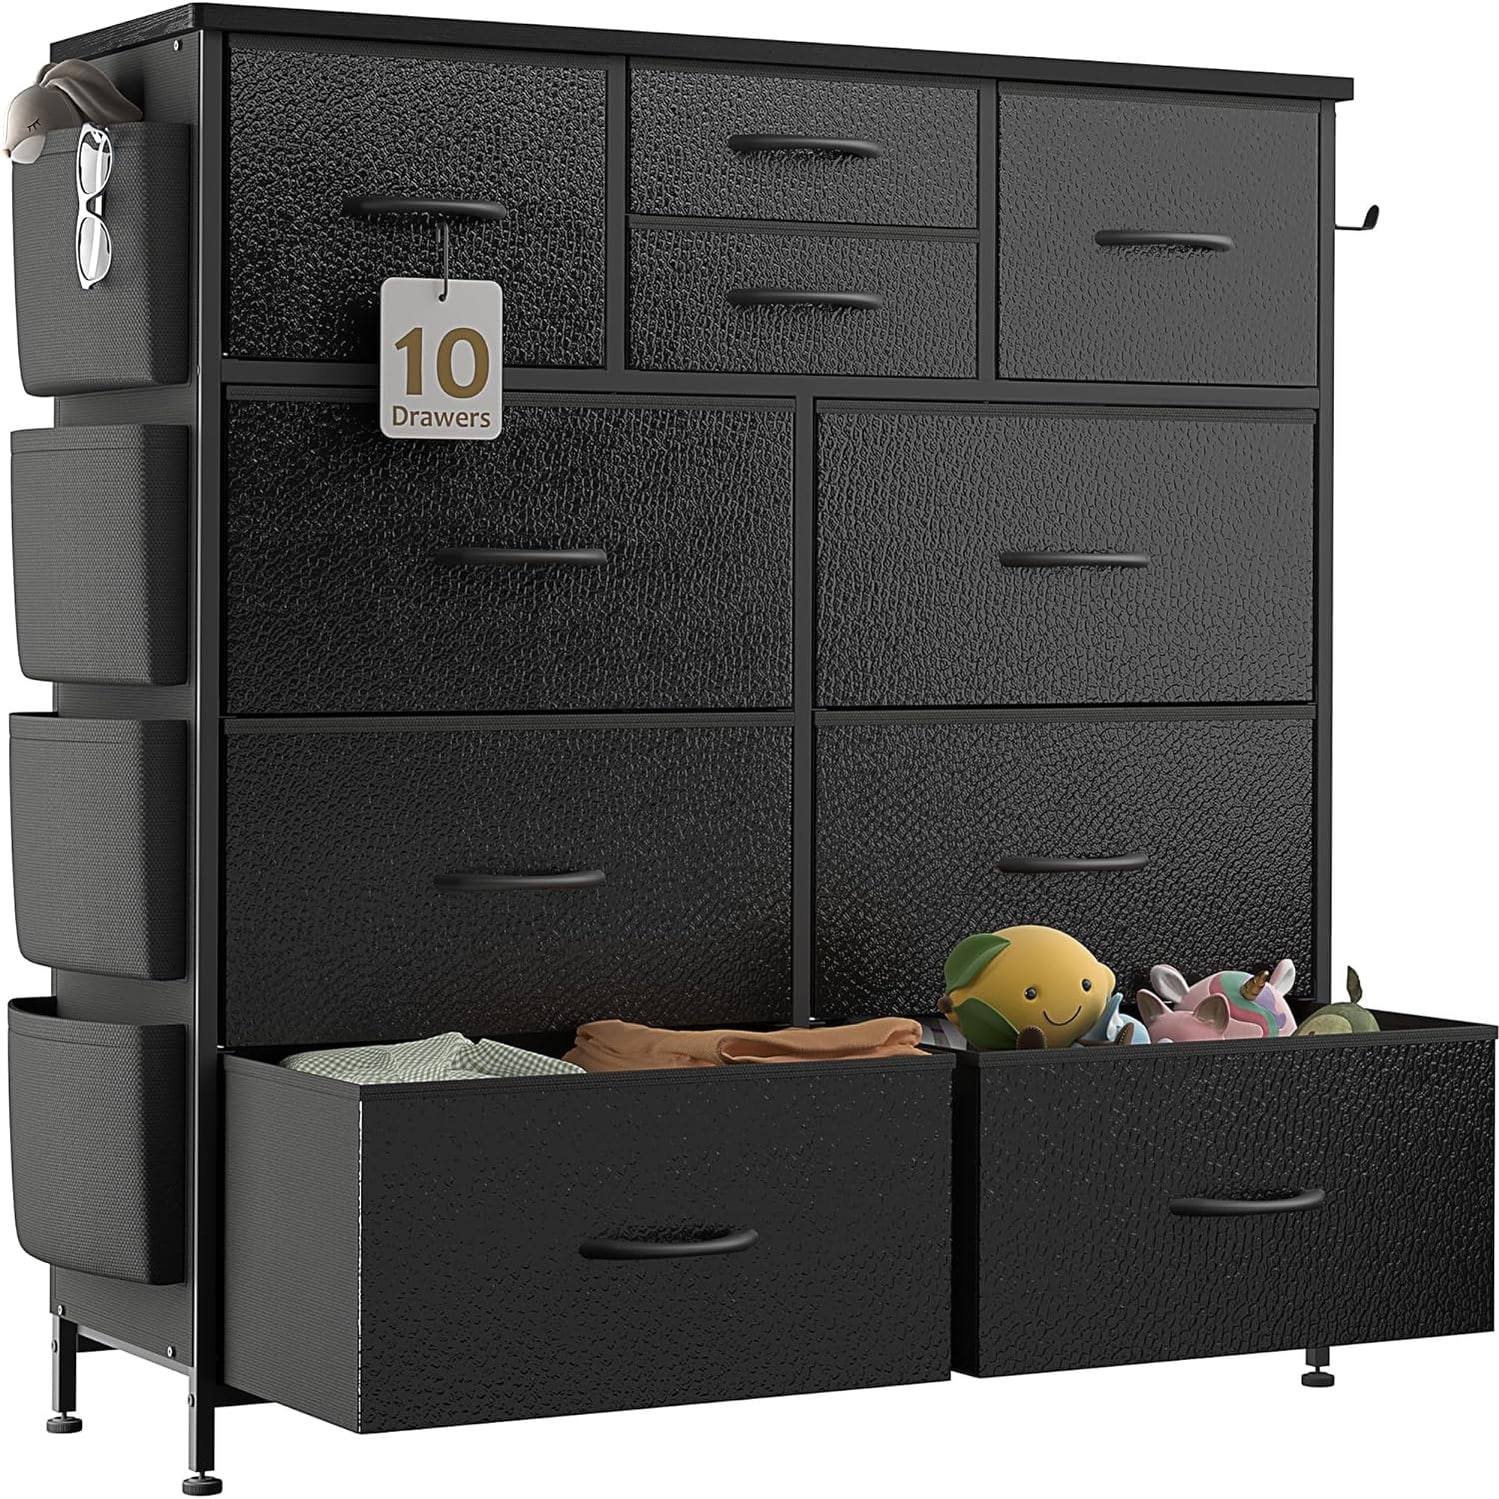 https://ak1.ostkcdn.com/images/products/is/images/direct/4a798838446e2a163f100fb286c967a860ea8682/10-Drawer-Dresser-Closet-Storage-Tower-Organizer-Unit-for-Bedroom.jpg